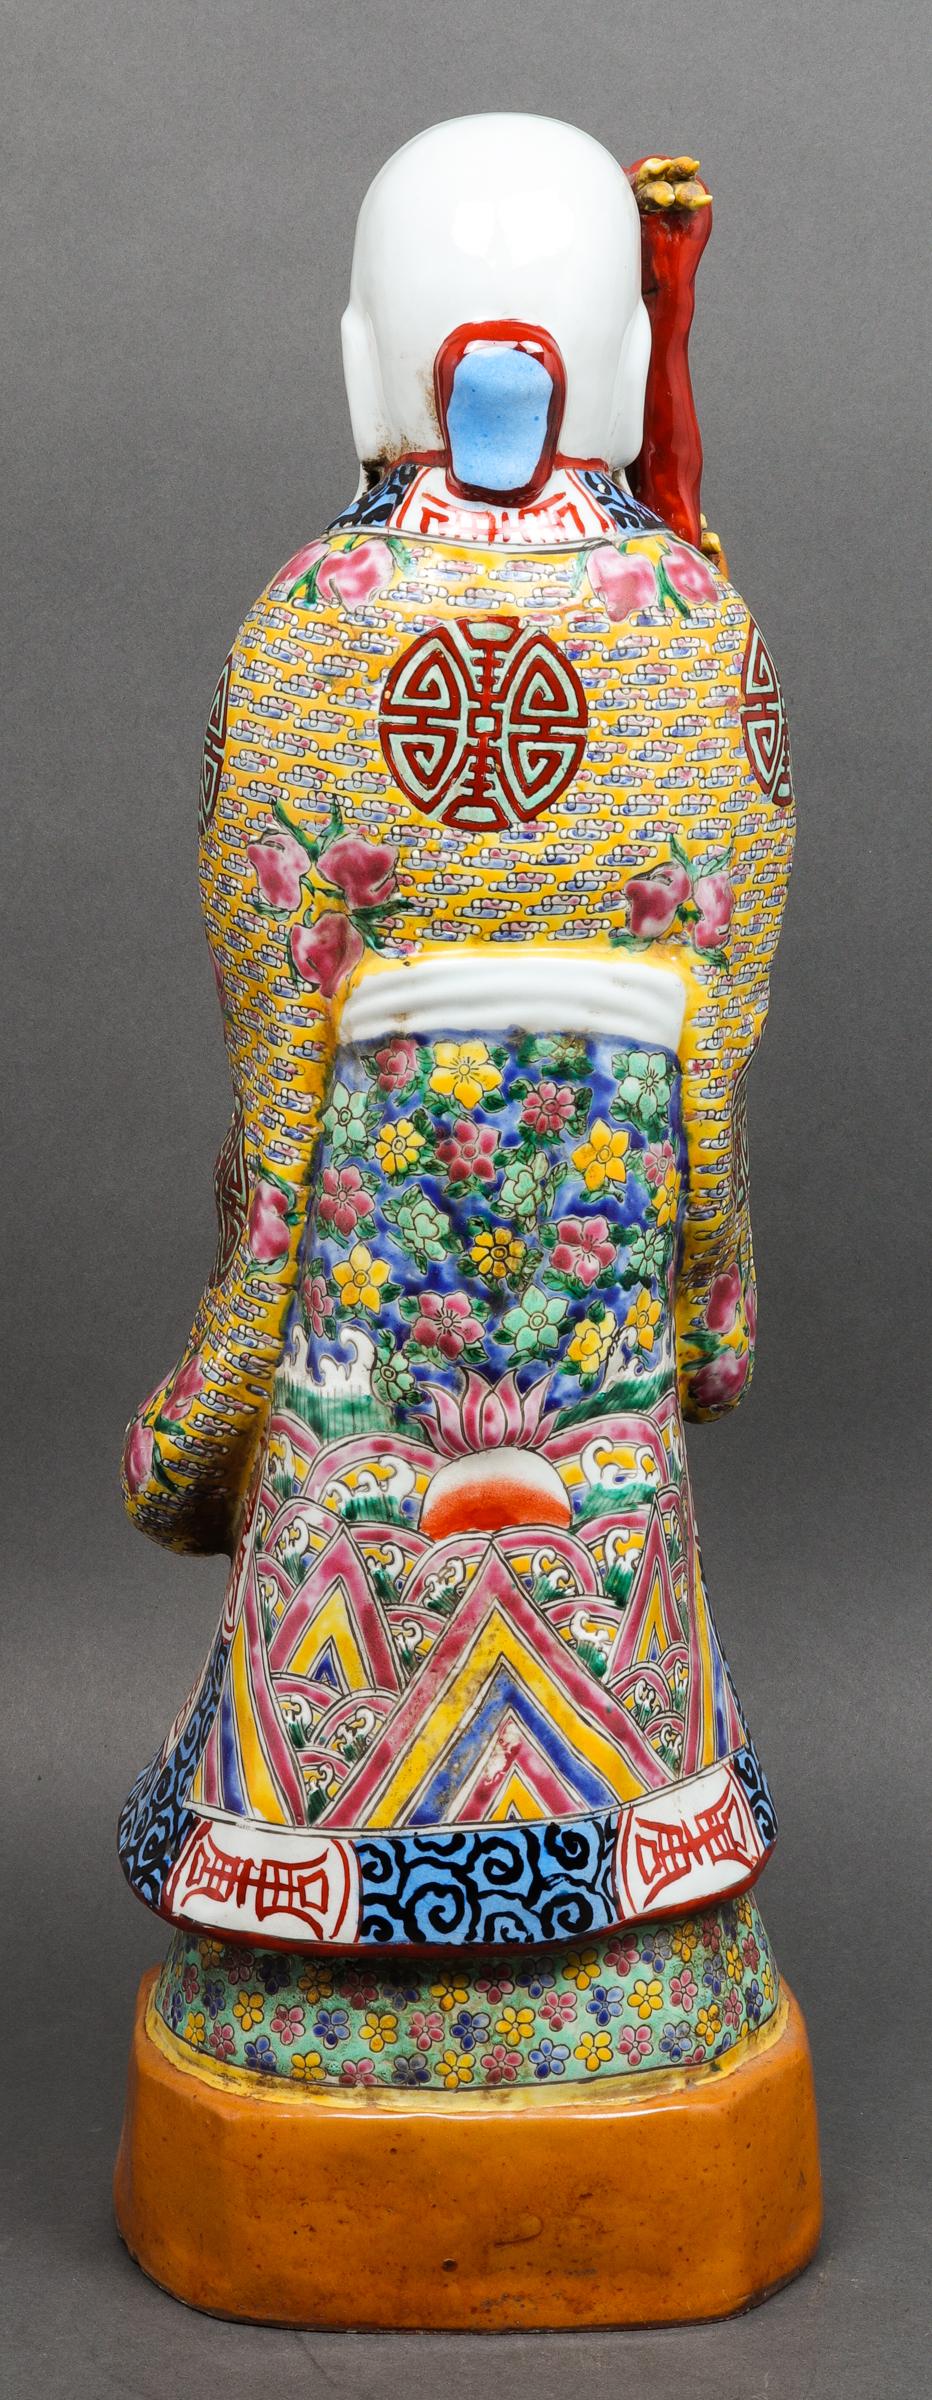 Chinese polychrome glazed ceramic figural sculpture of Shou-Lao, god of longevity, holding a dragon staff in one hand and a peach in the other, his elaborate robe with shou symbols, peaches, and floral design, stamped to underside. 21